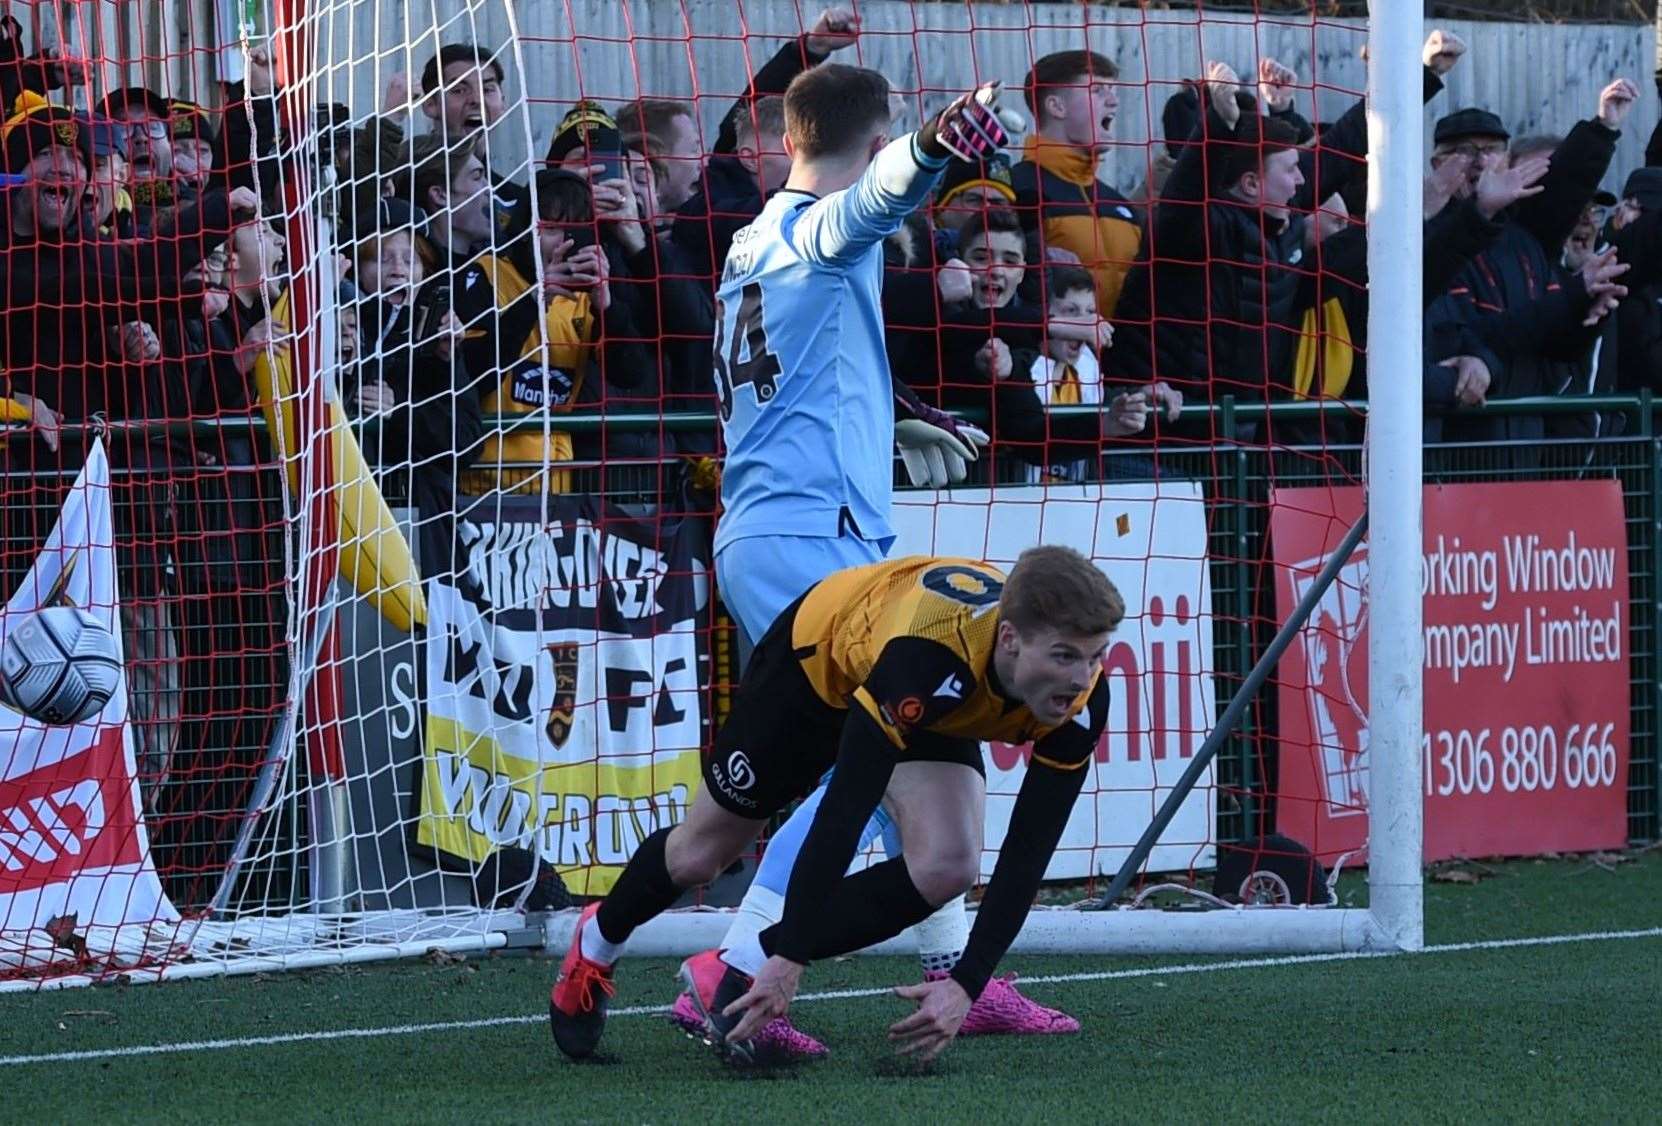 Maidstone's Jack Barham finds the net for a second time at Dorking but - once again - the goal is ruled out for offside. Picture: Steve Terrell